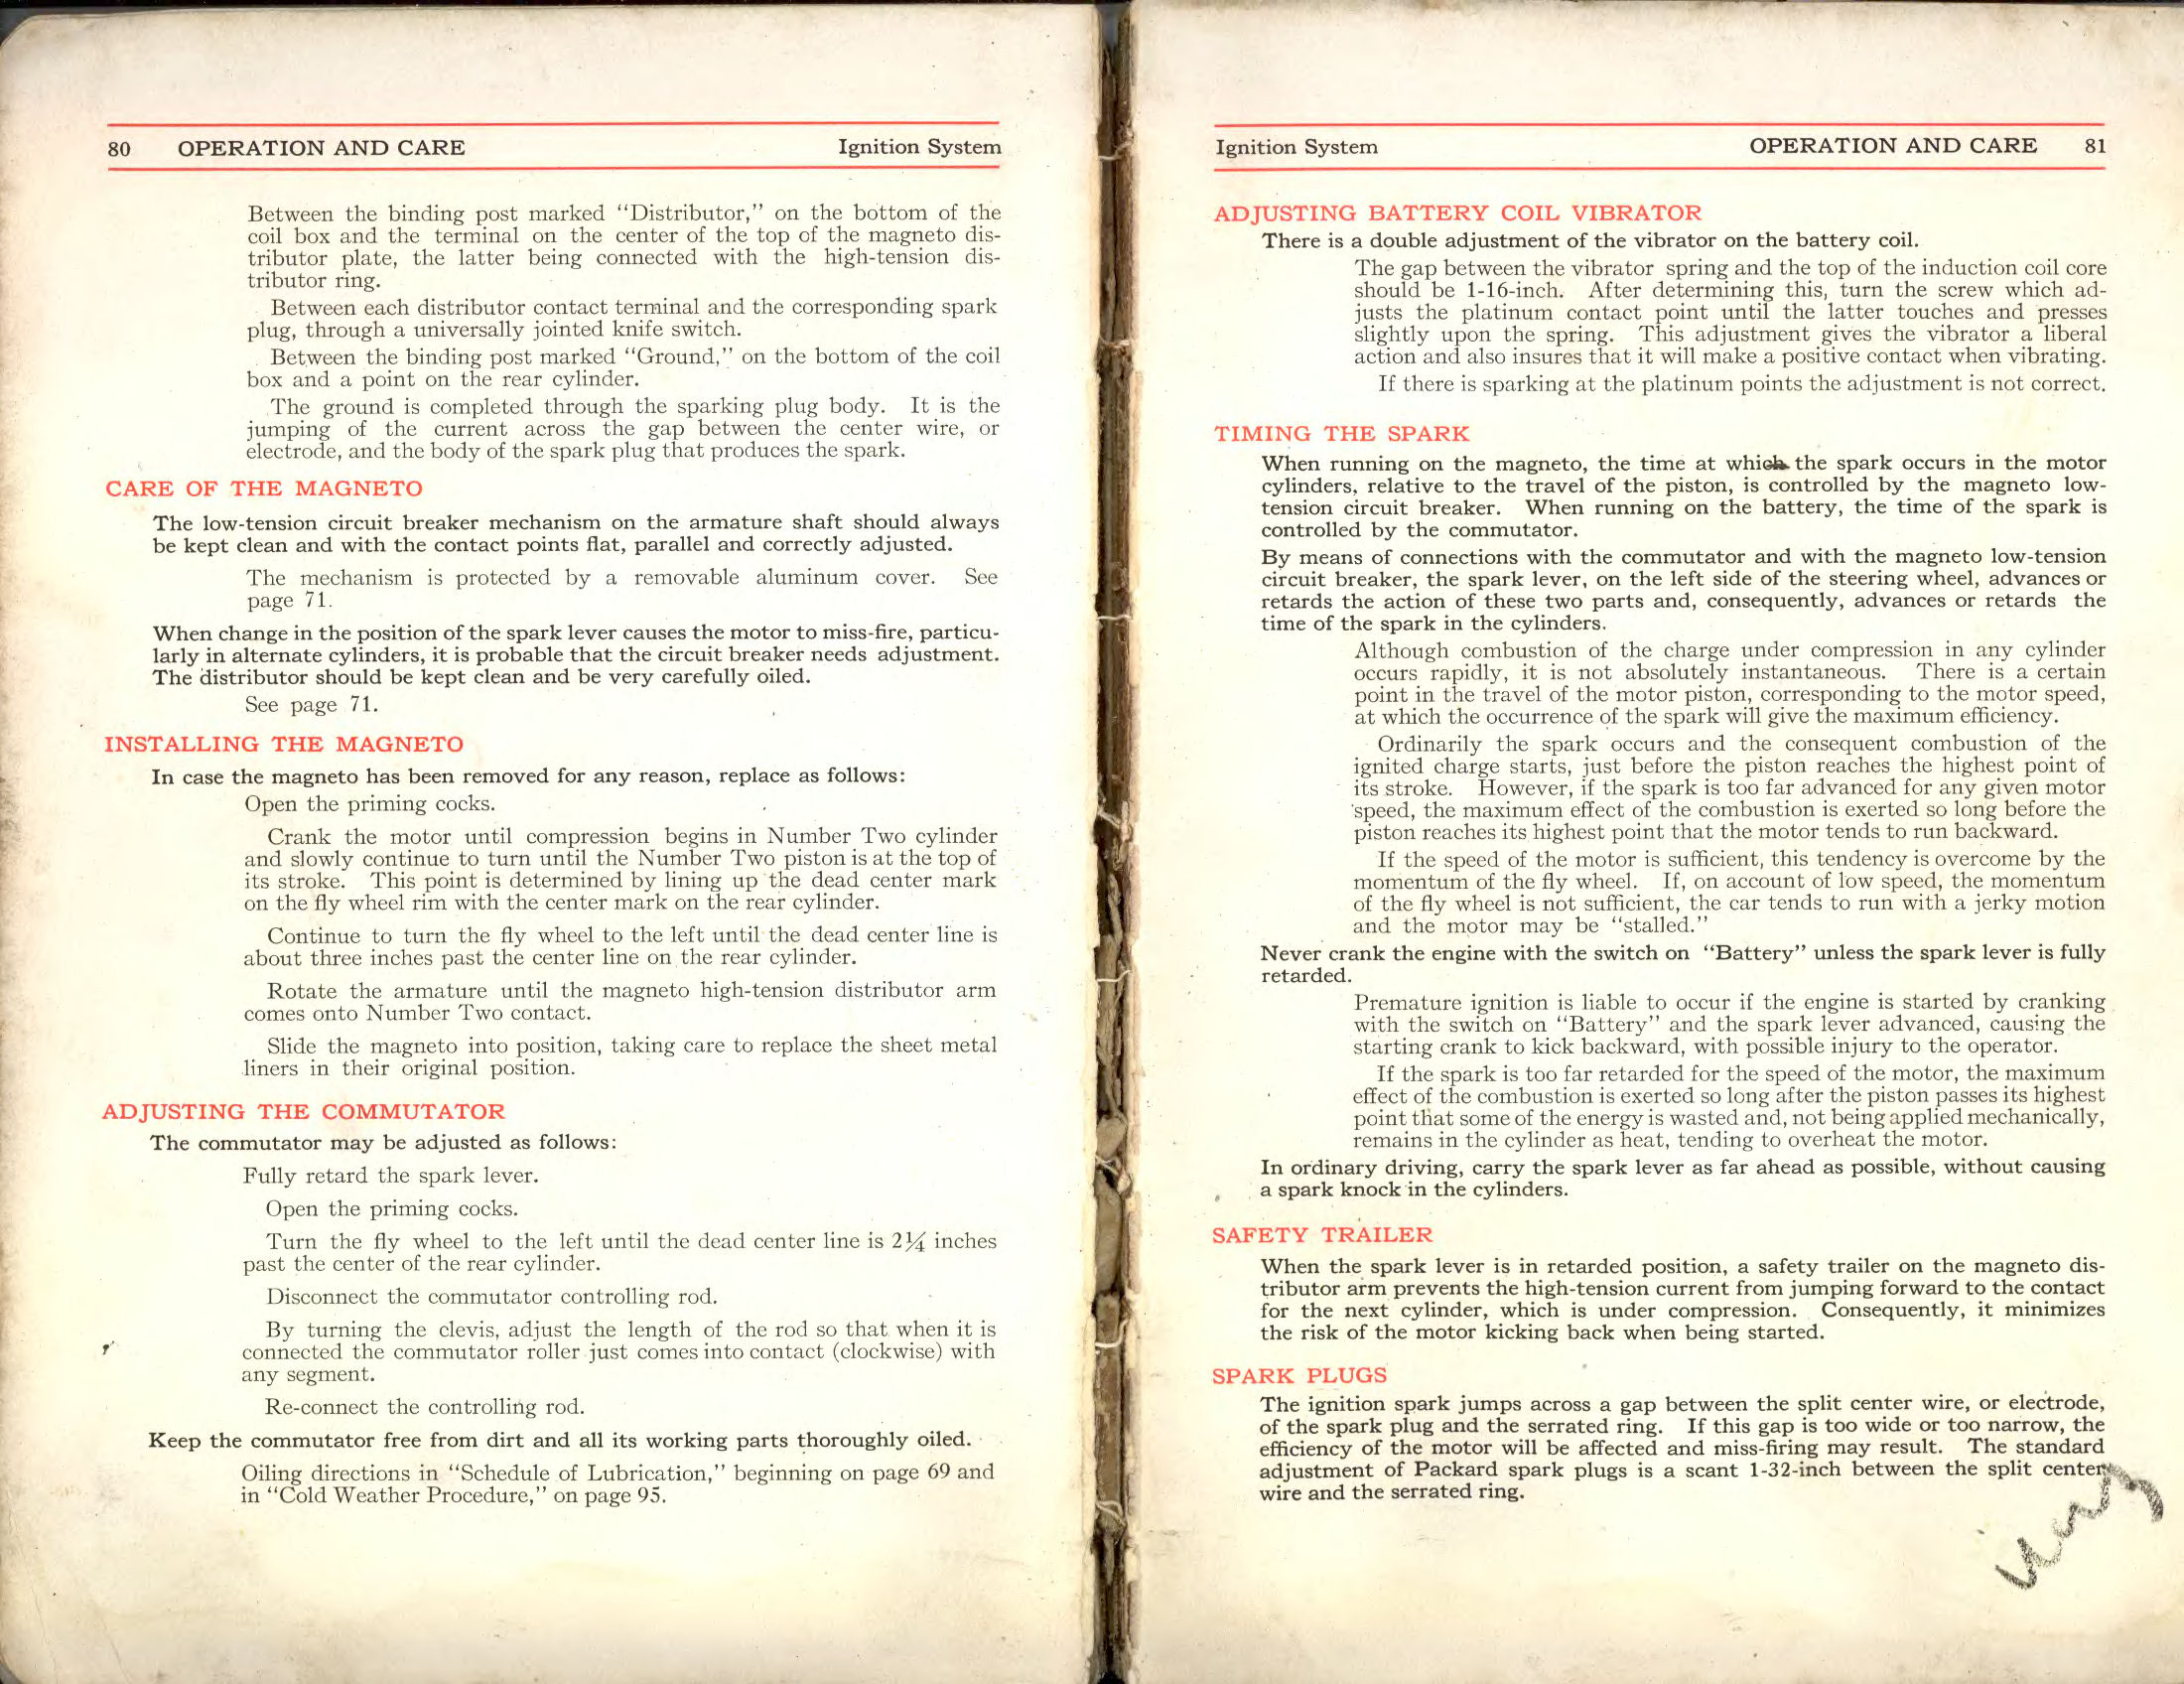 1911 Packard Owners Manual Page 10